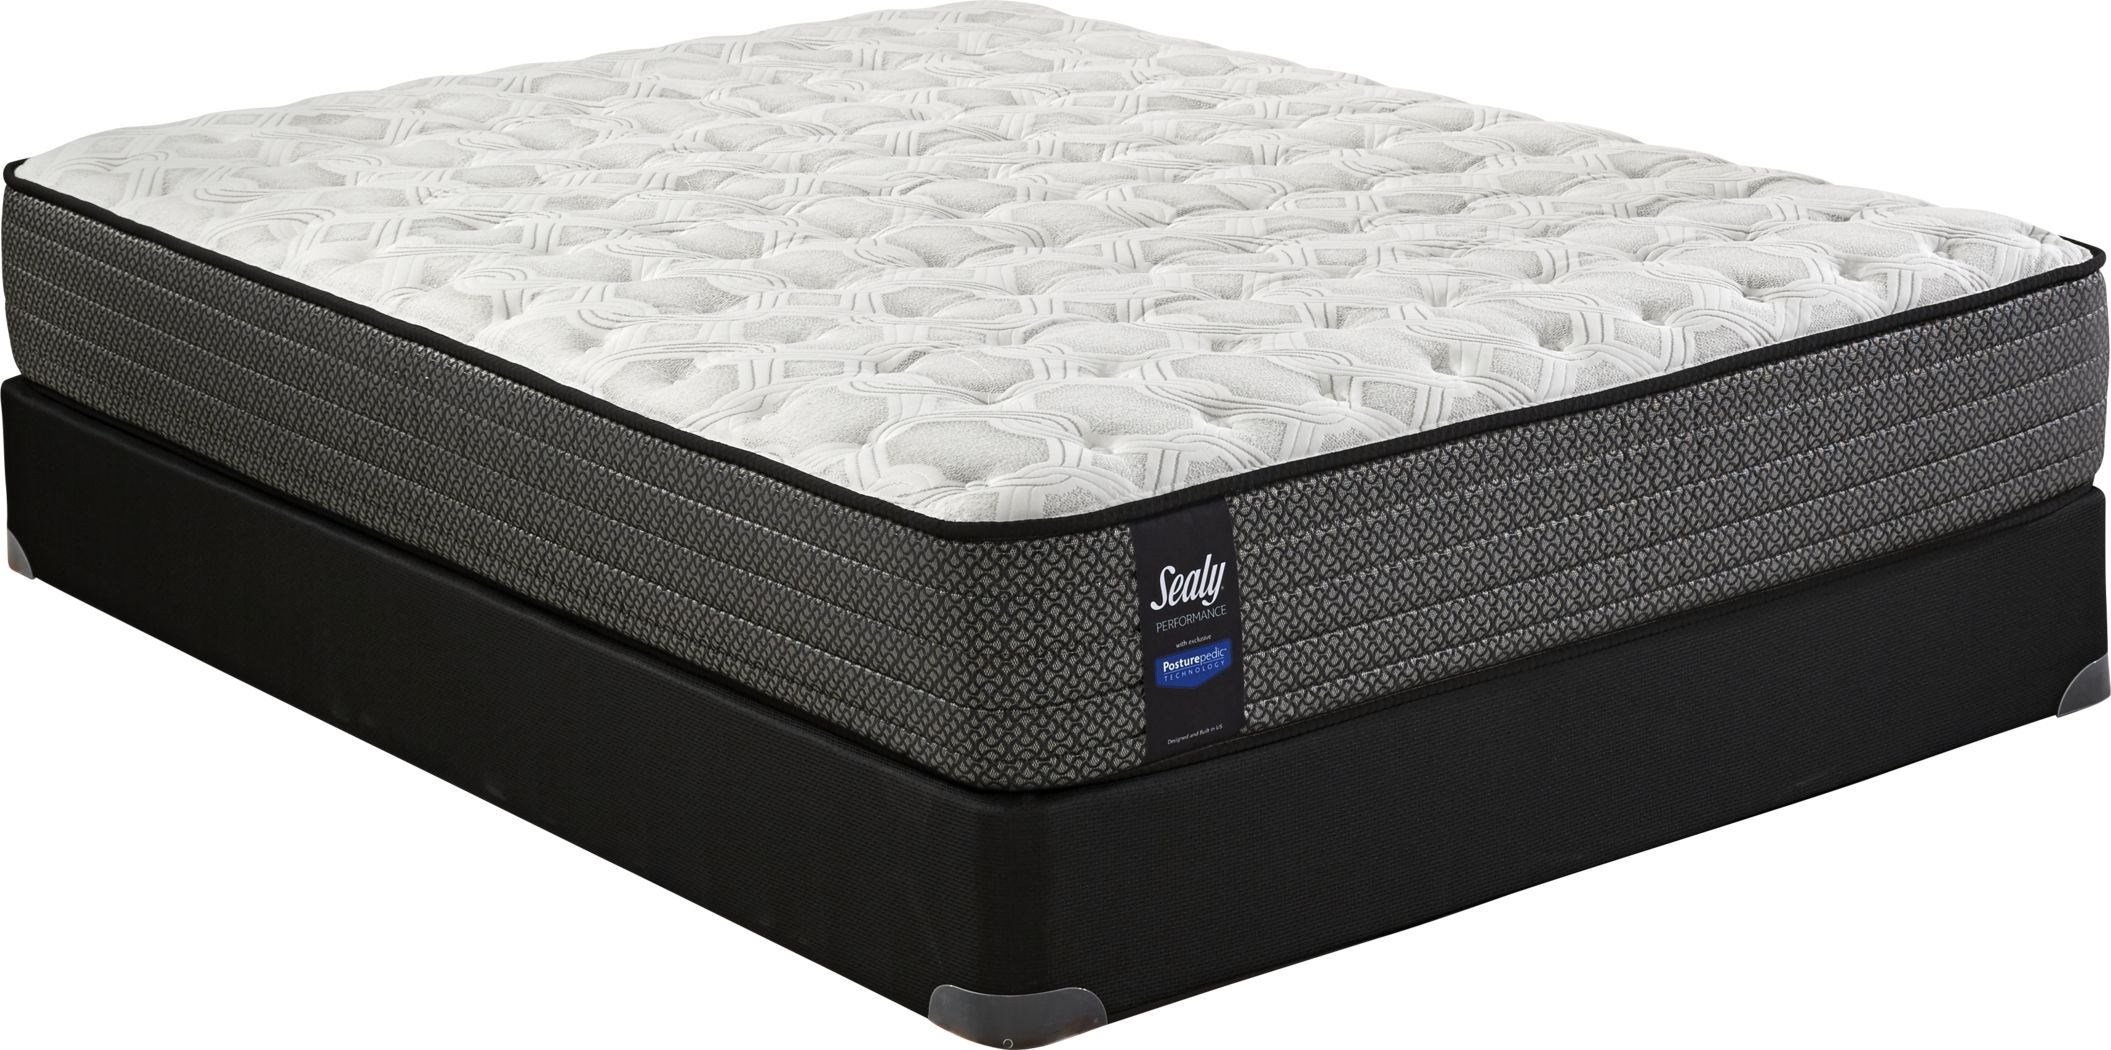 specifications for sealy mattresses